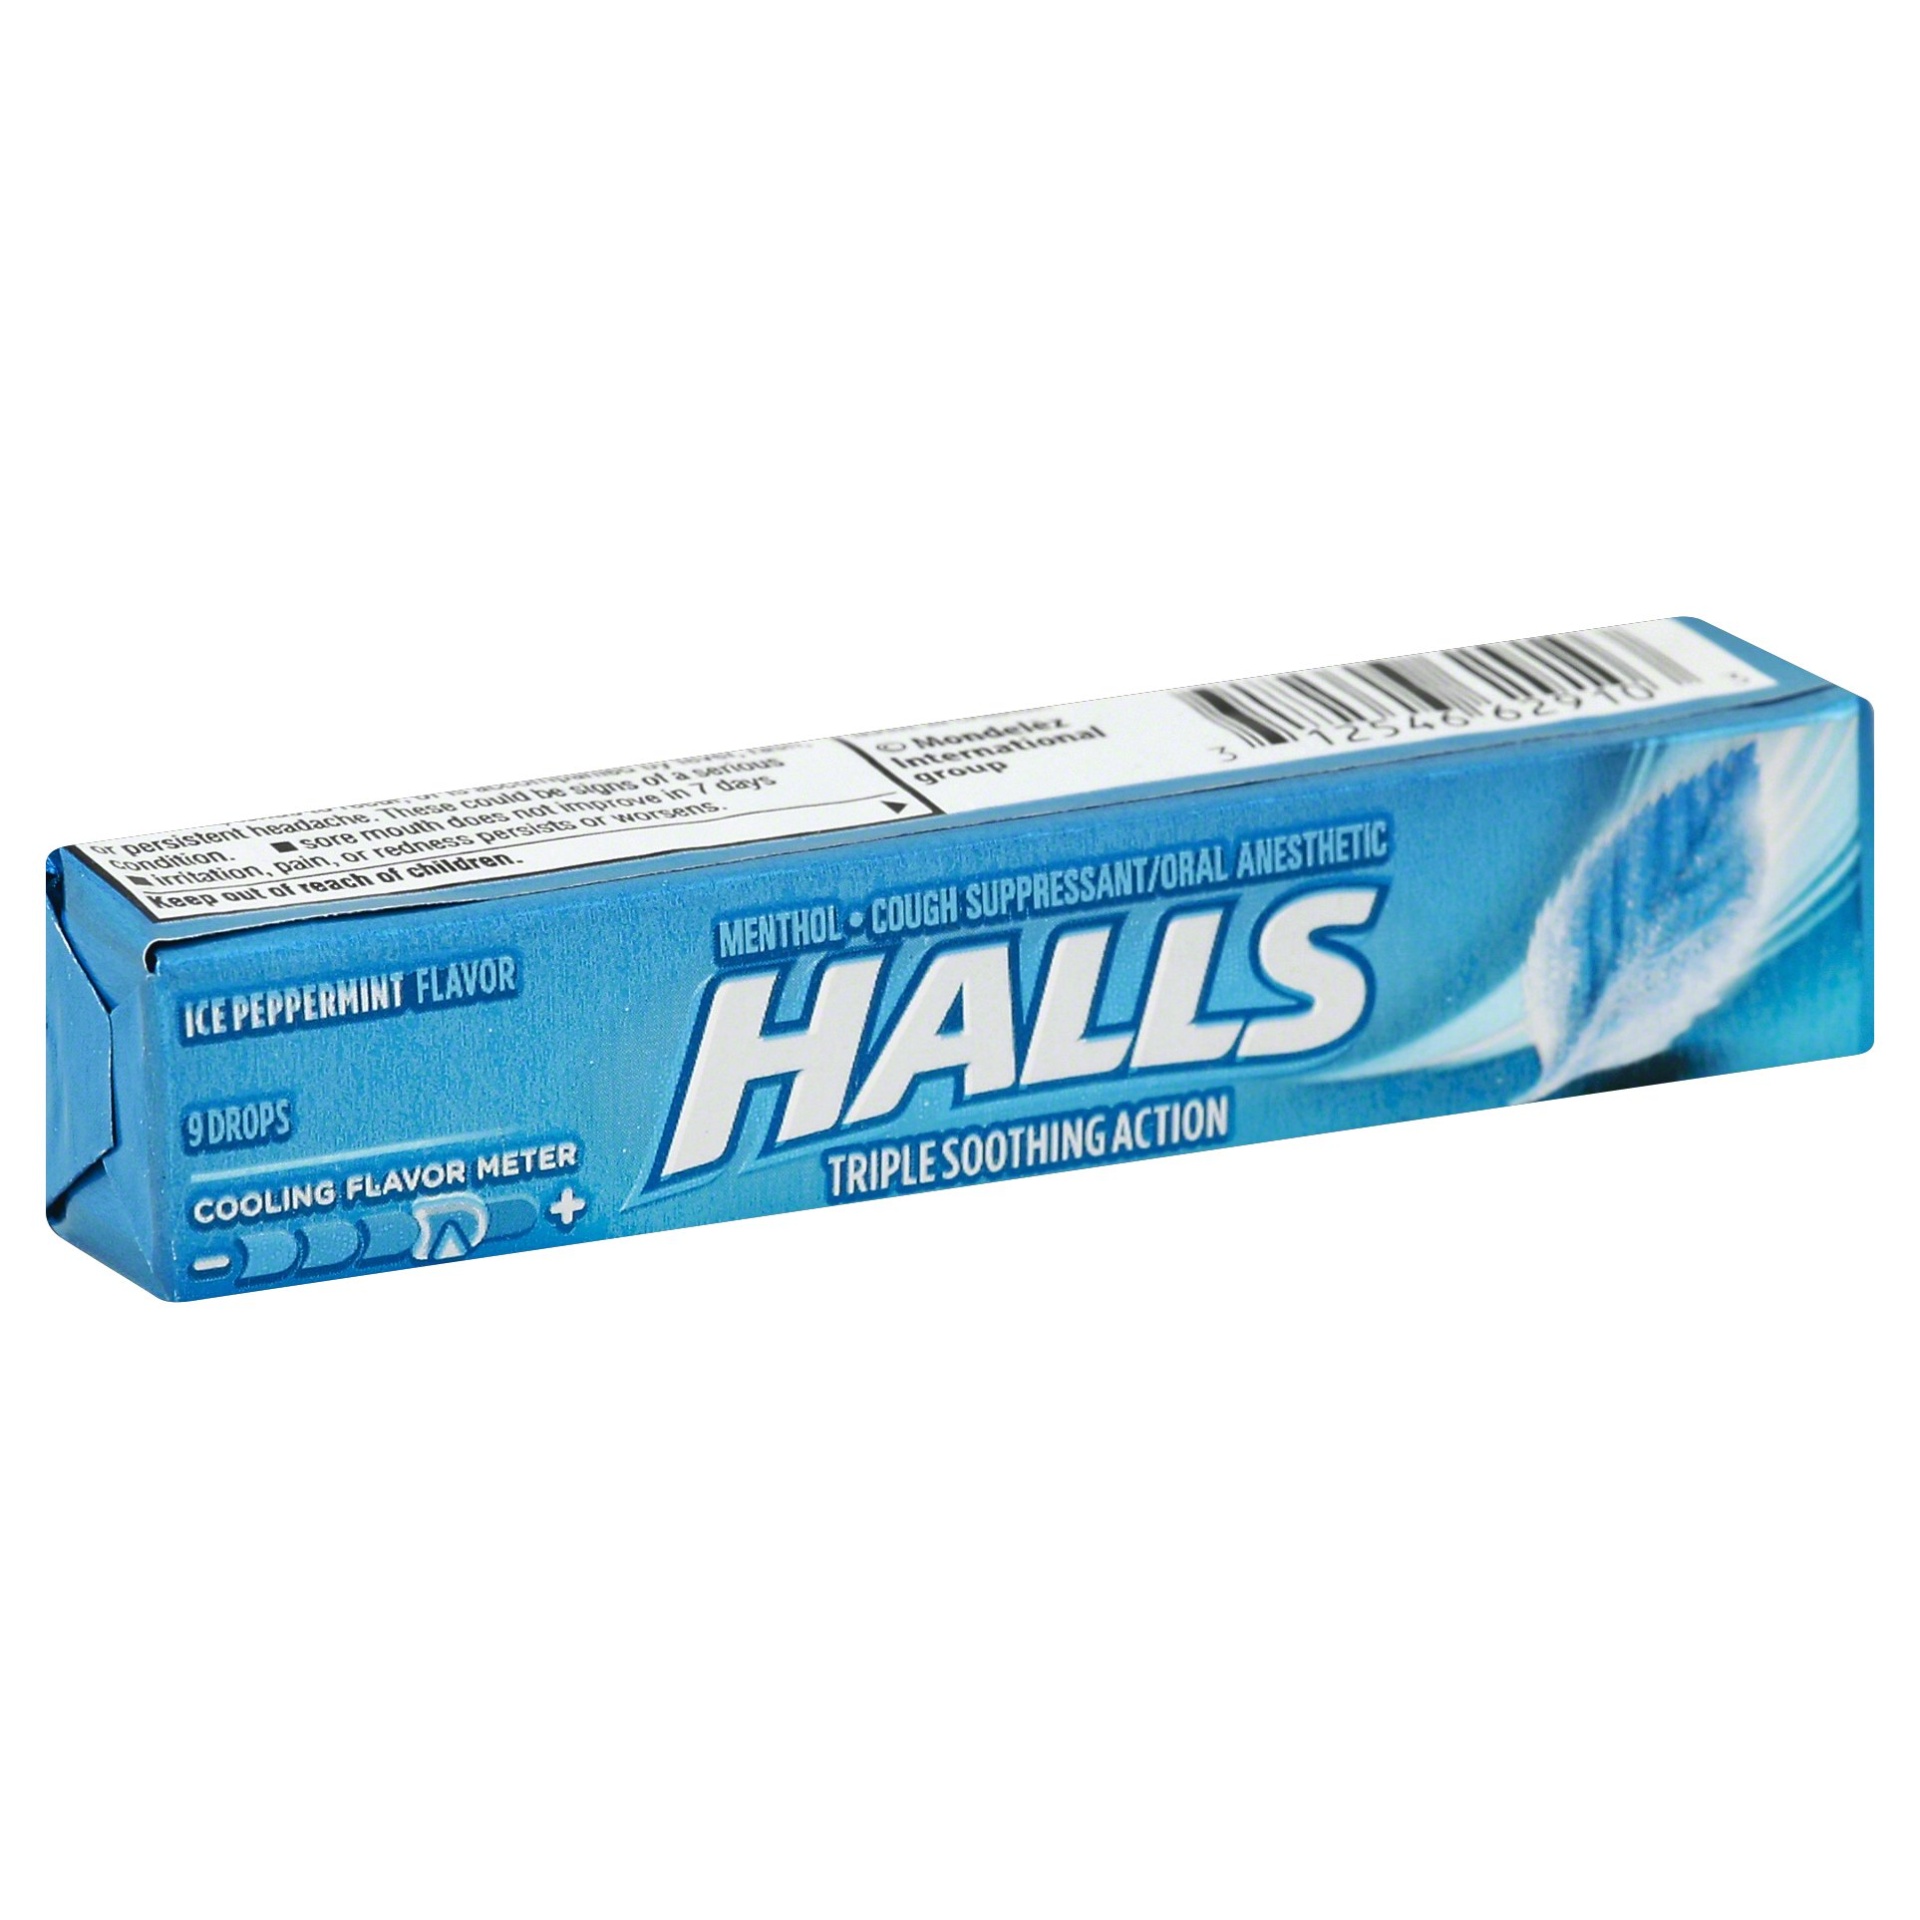 slide 1 of 6, Halls Menthol Cough Suppressant Oral Anesthetic Drops Ice Peppermint Flavor, 9 ct